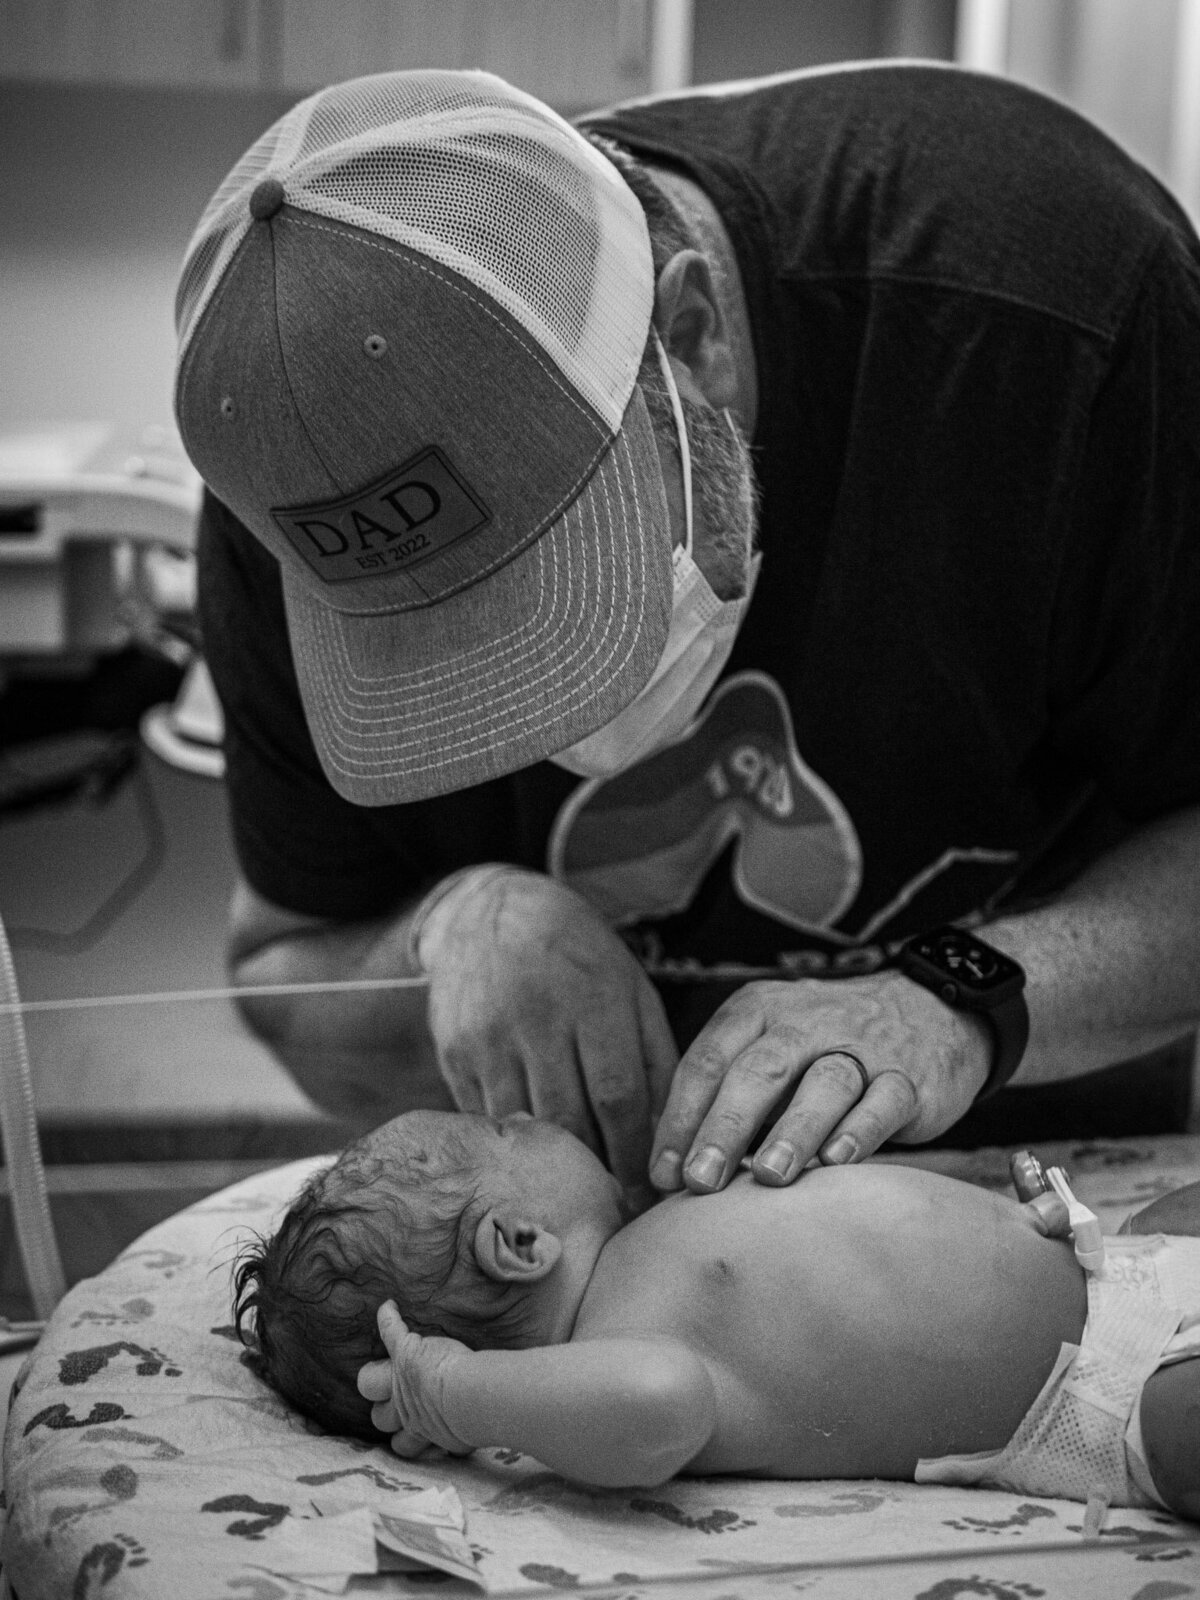 A new dad curiously inspects his newborn while it lays in a hospital warming bed.